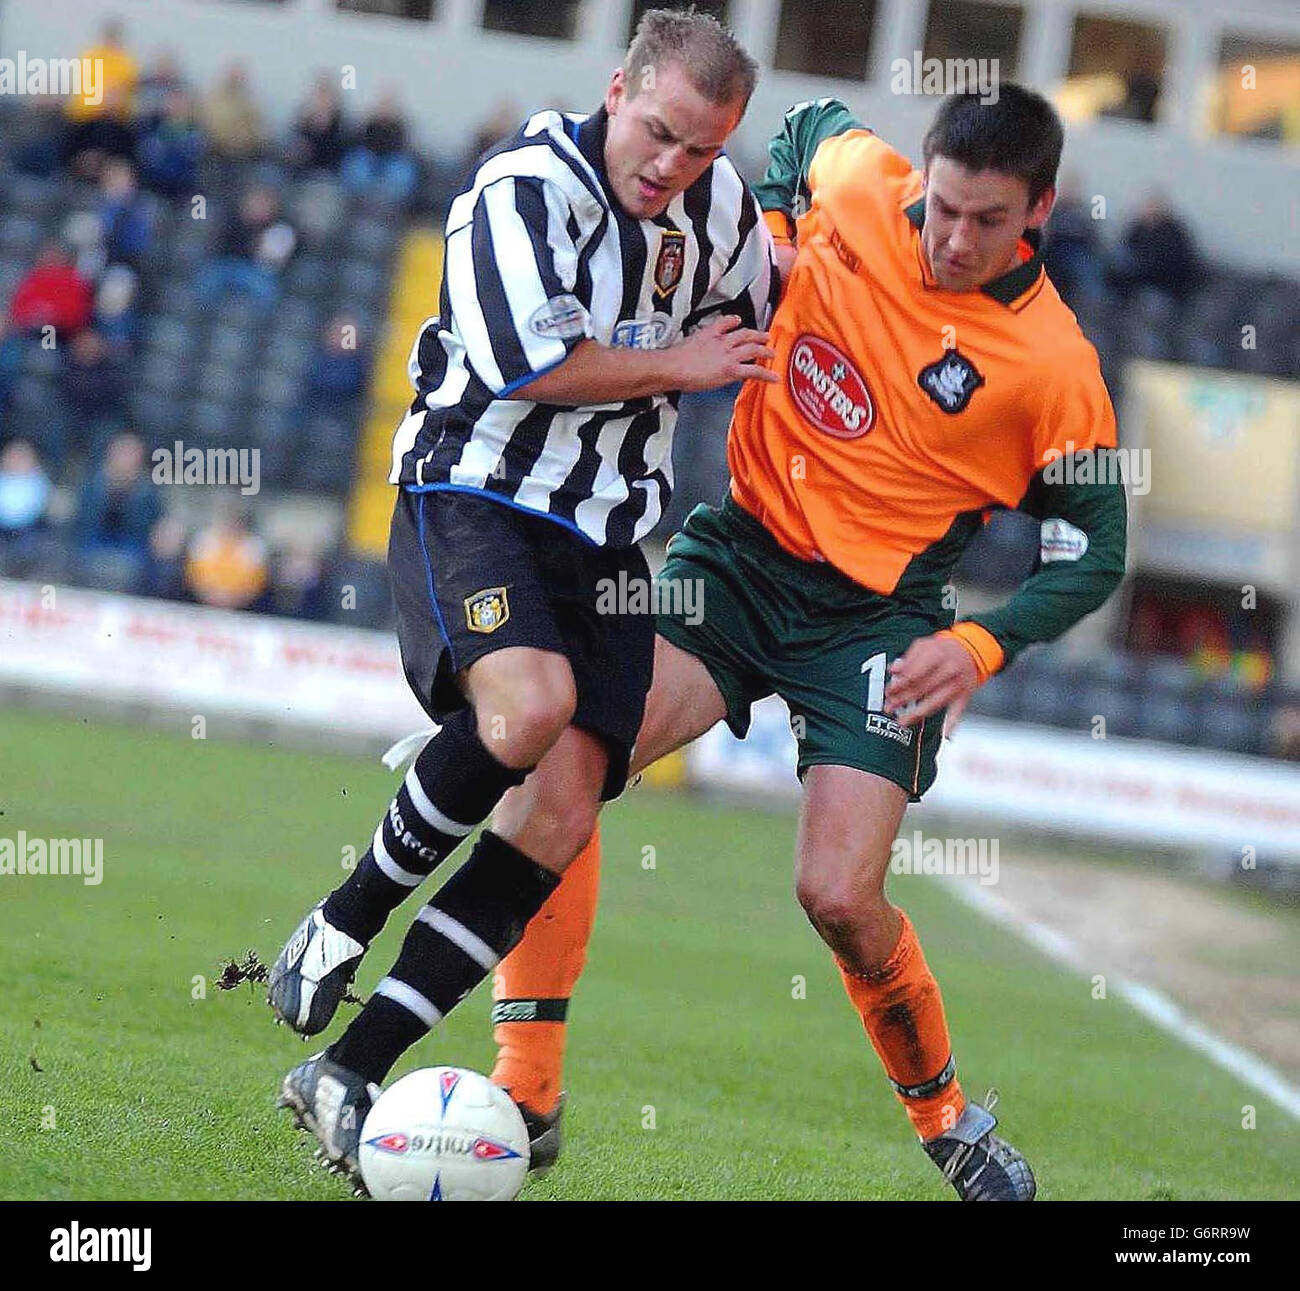 Notts County's David Pipe is tackled by Plymouth's Ian Stonebridge, during the Nationwide Division Two match at the County Ground, Nottingham, Saturday March 6, 2004. NO UNOFFICIAL CLUB WEBSITE USE. Stock Photo